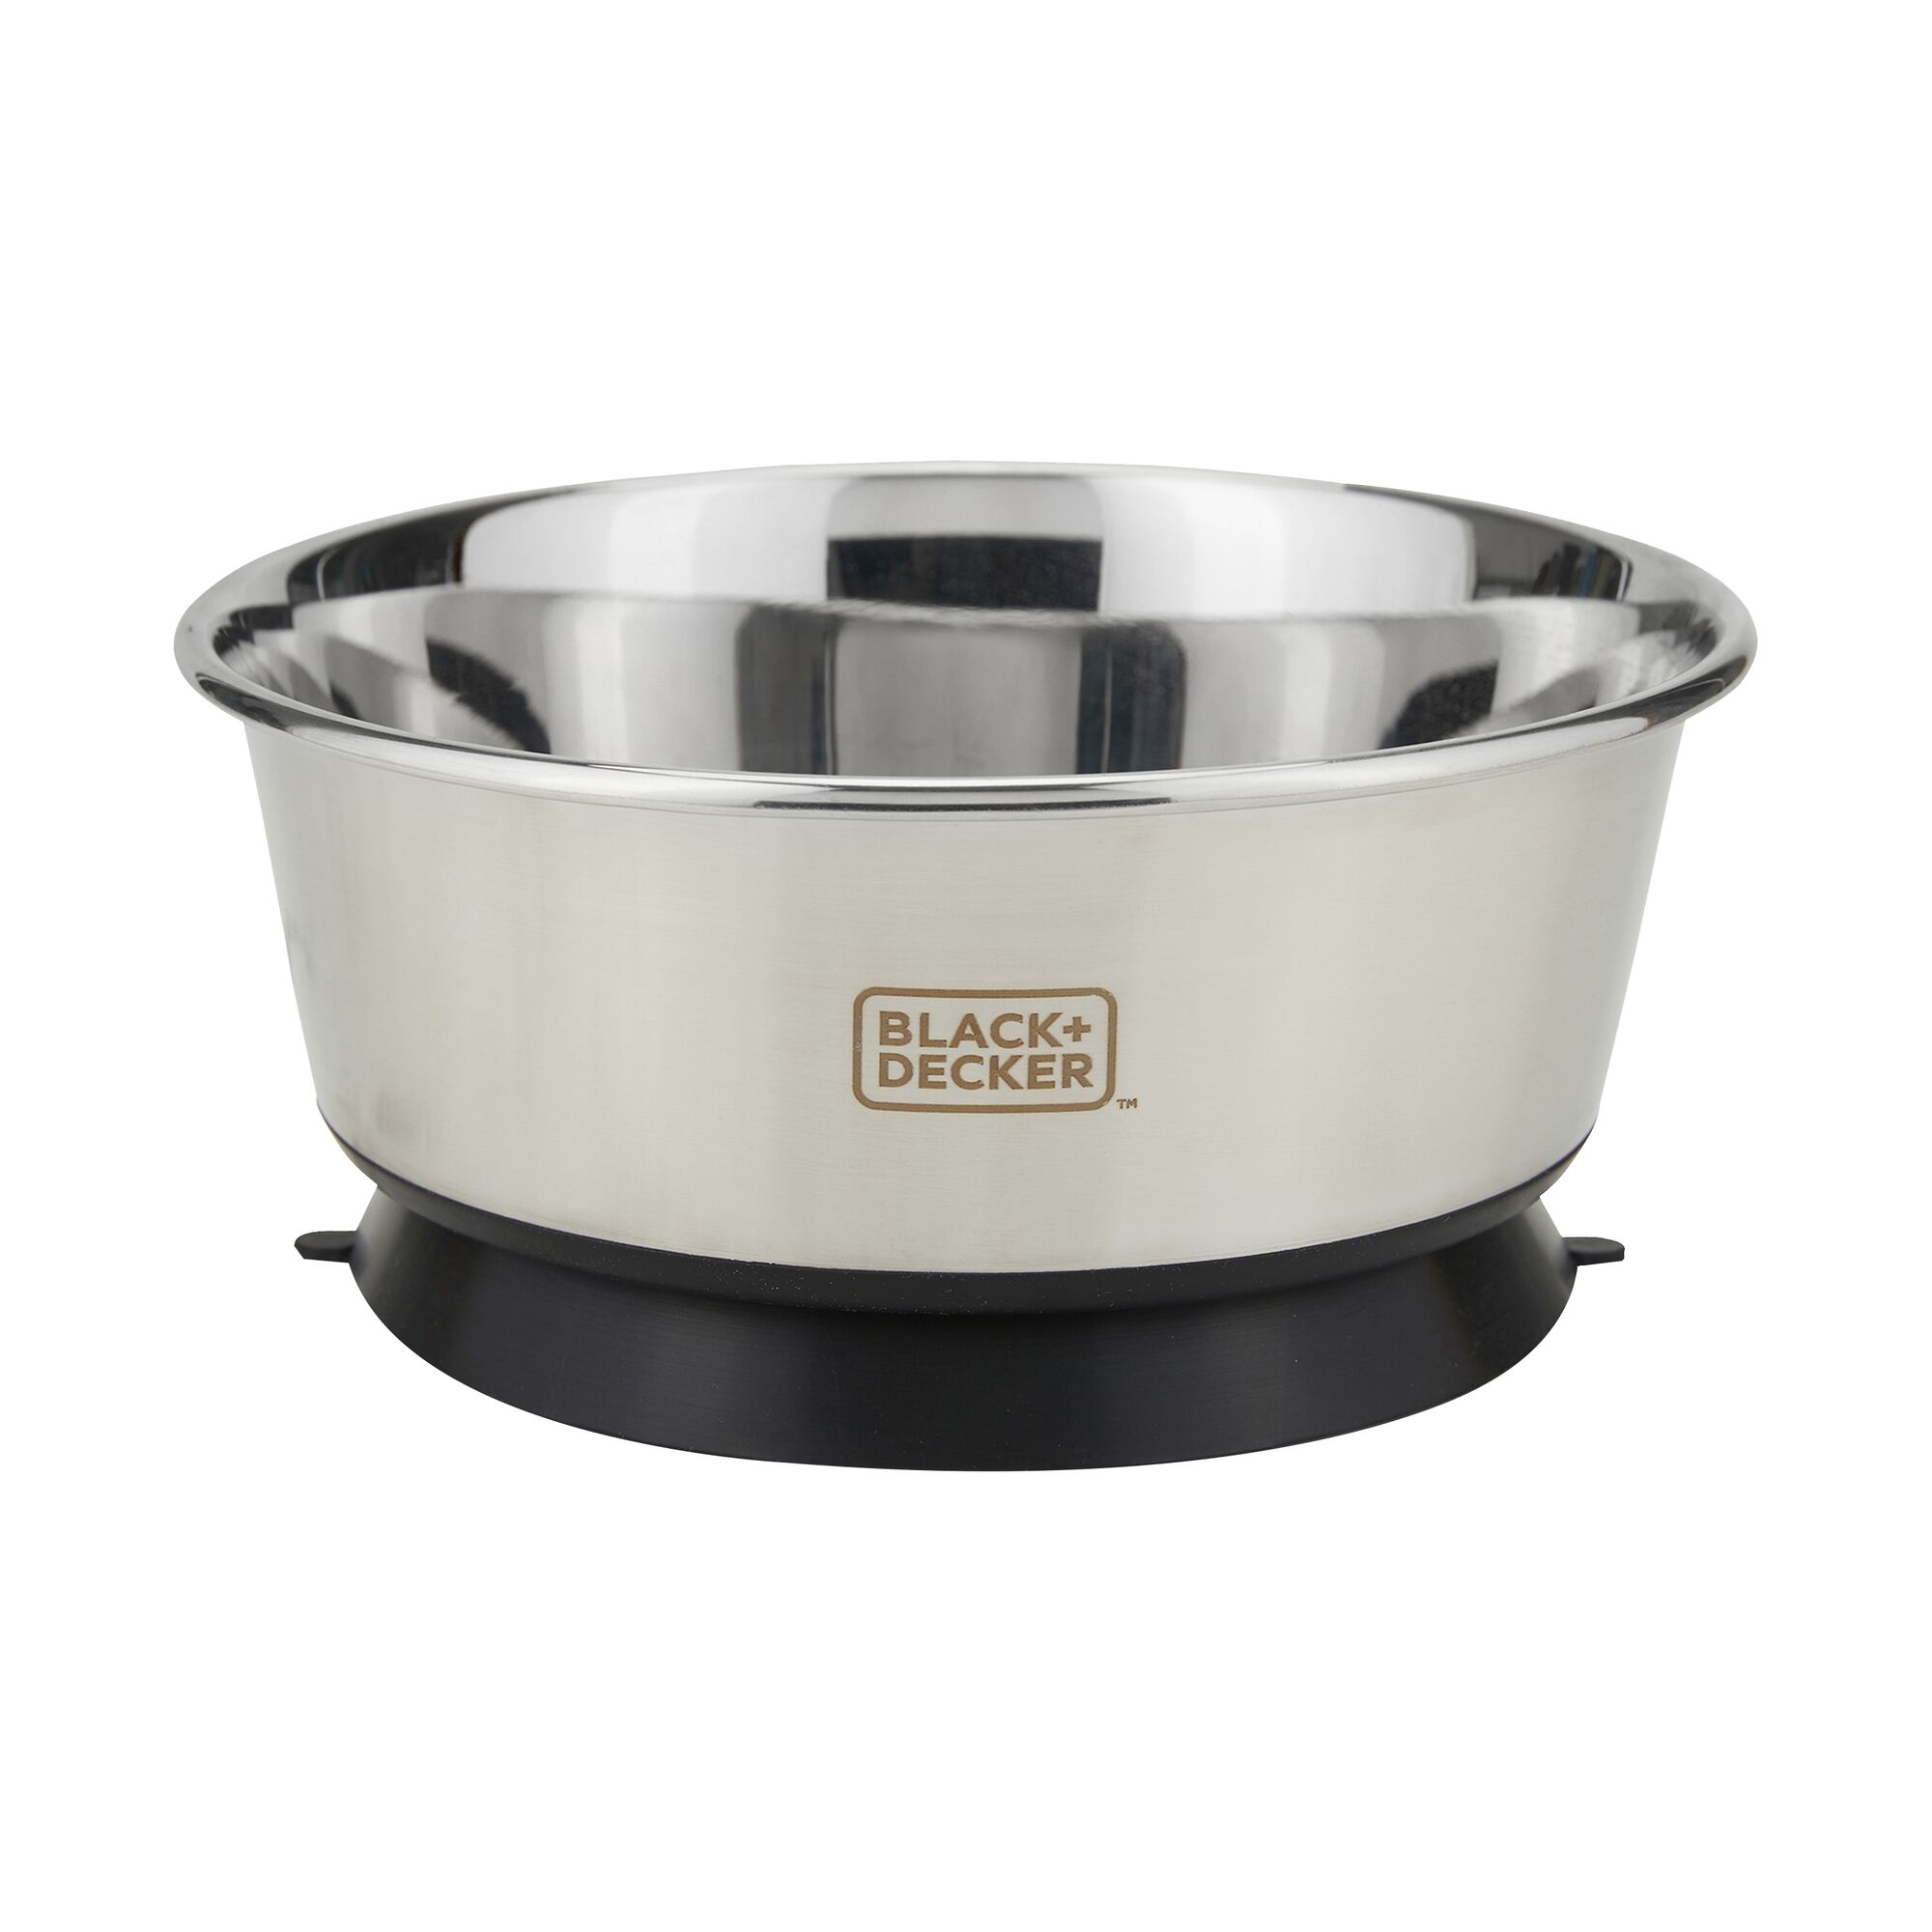 Side view of Stainless Steel Black and Decker 5 Cup or 40 oz. Suction Bowl